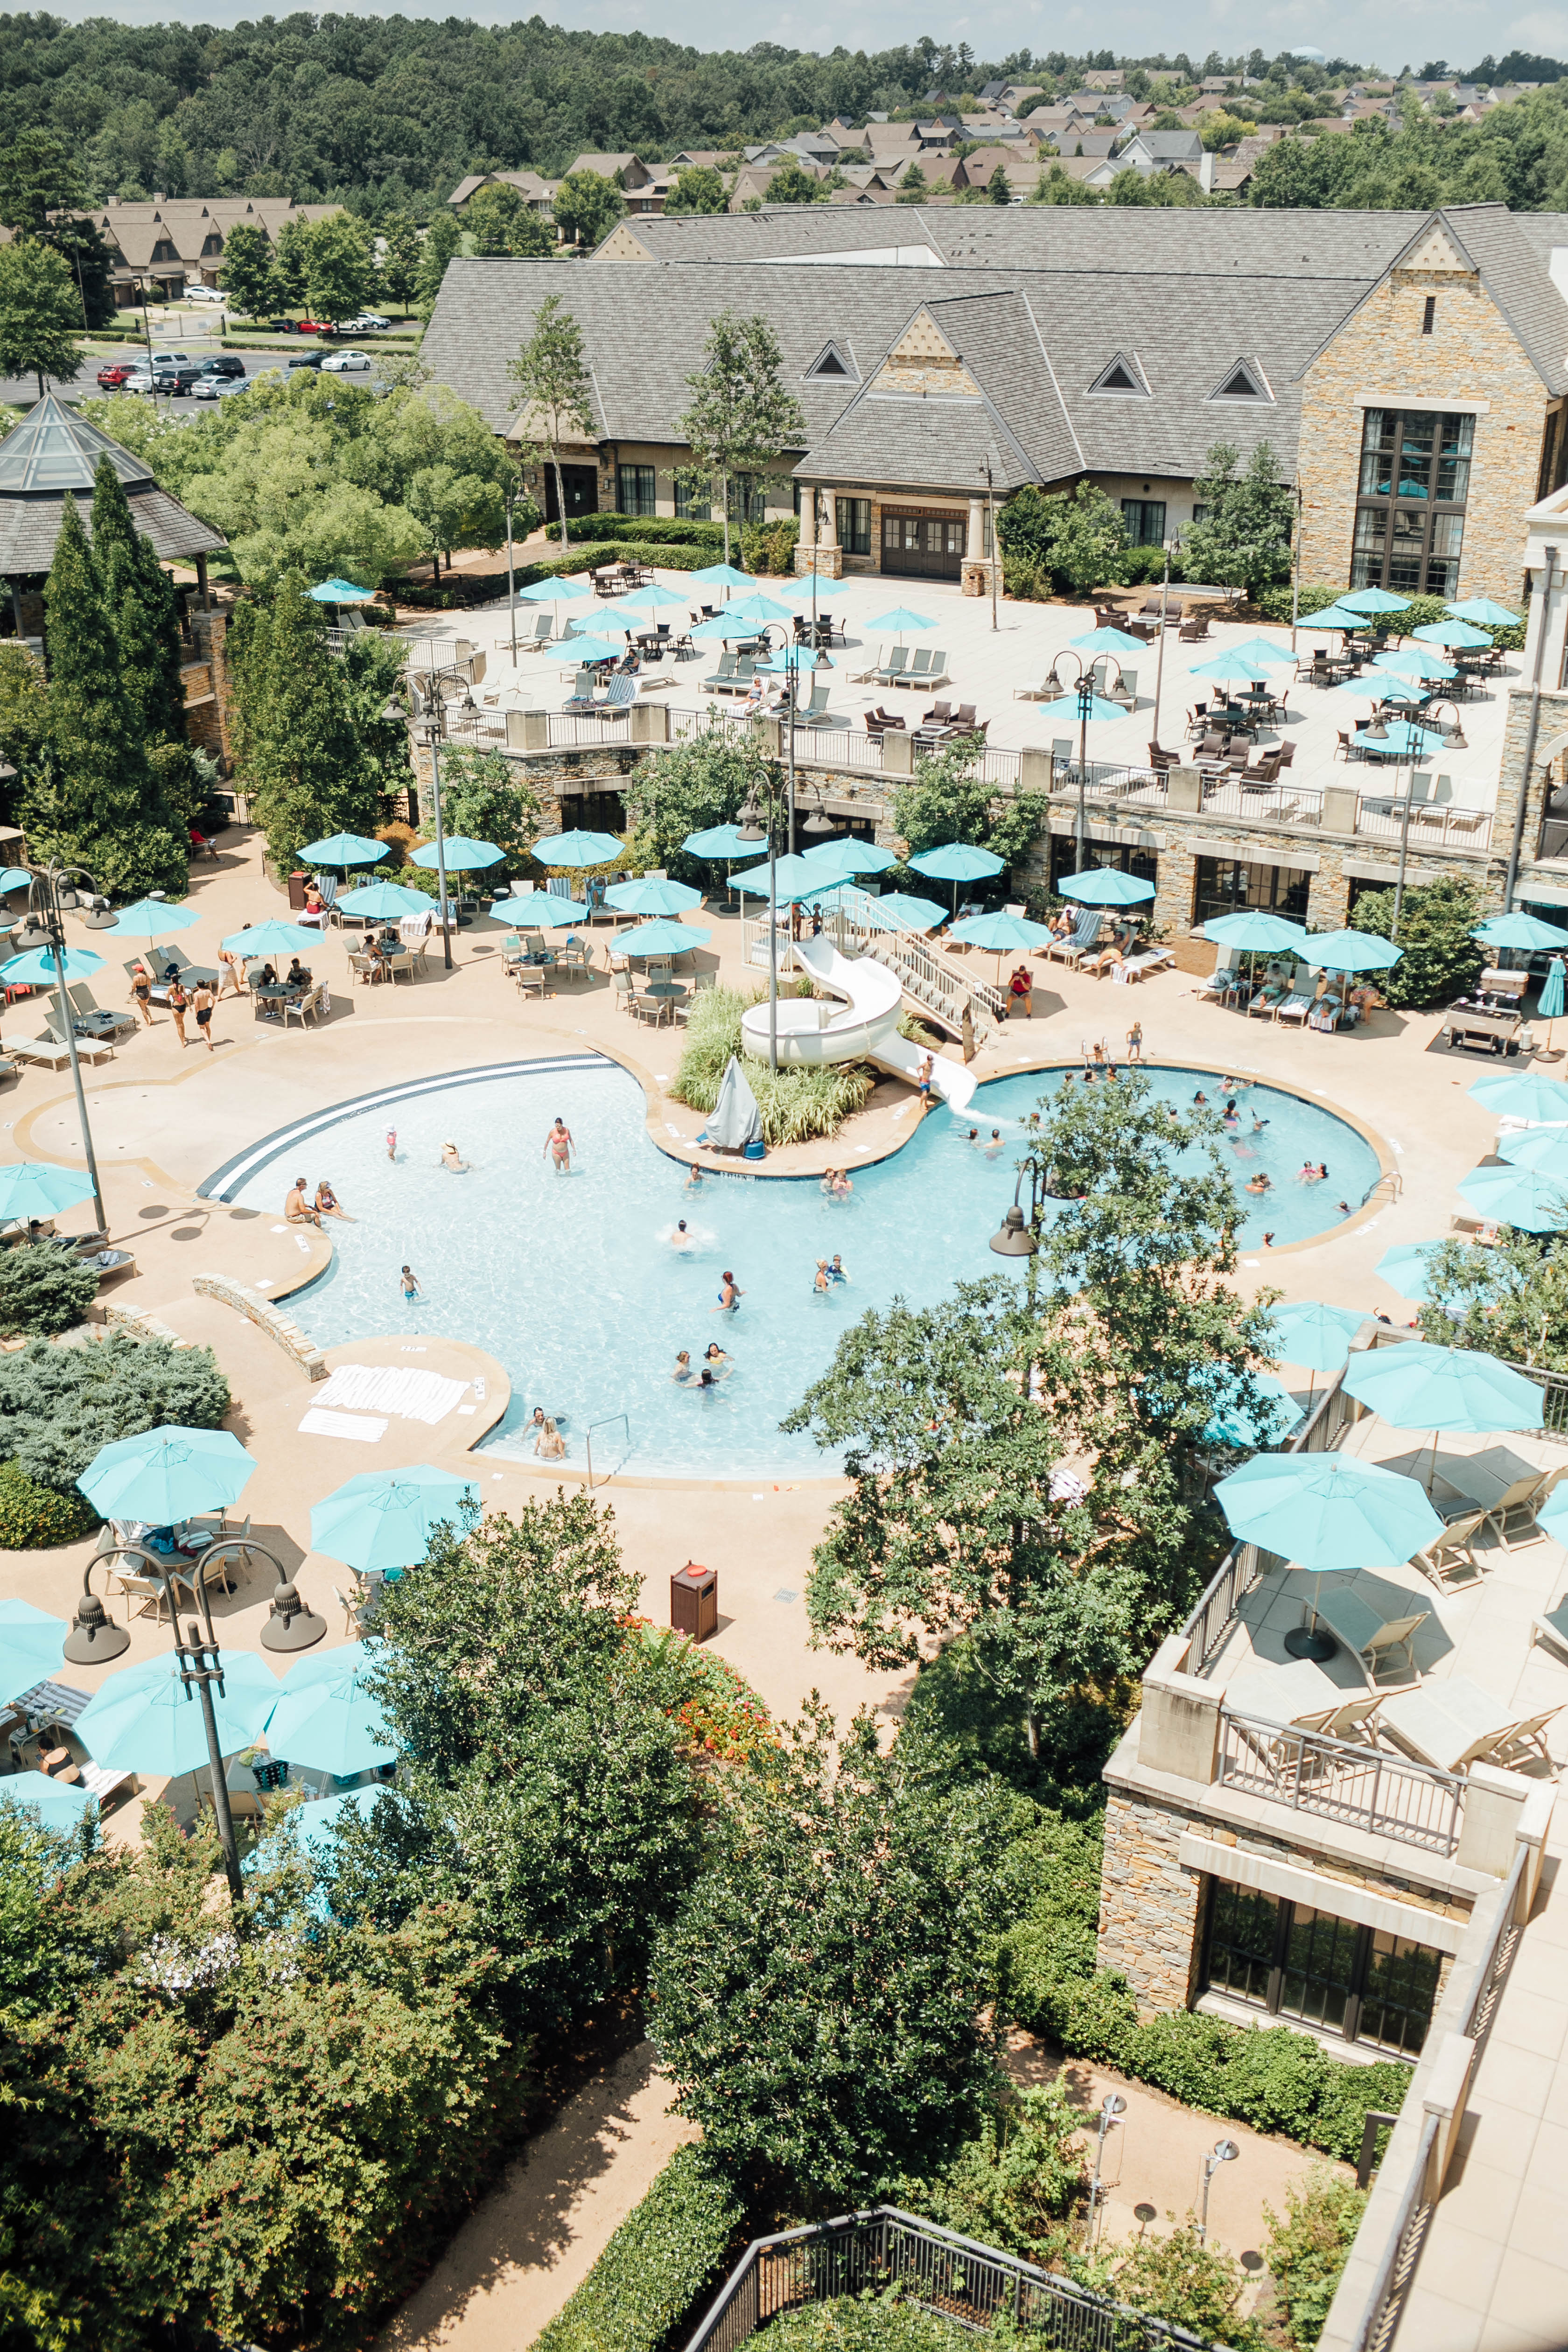 family-friendly resort in Alabama, places to stay in Alabama, Renaissance Bridge Hotel pool, resort pool